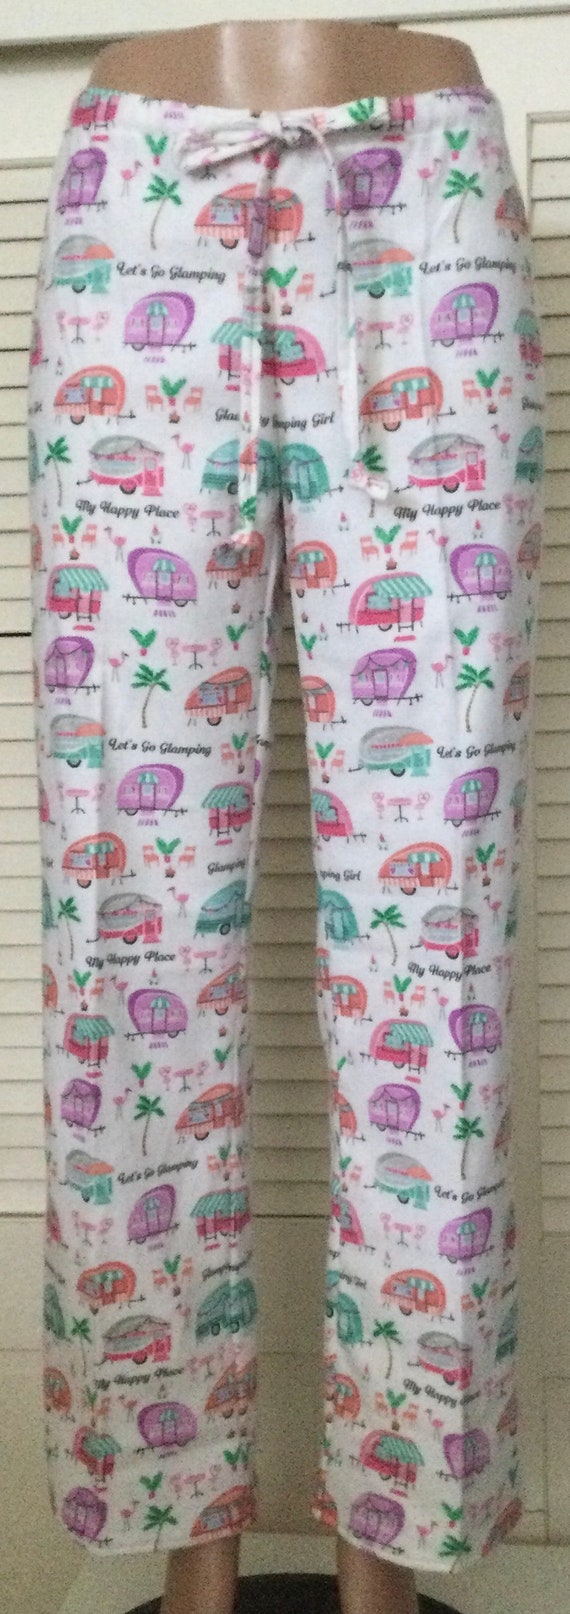 Flannel Pajama Pants for Women/size Small/29.5 Inseams/glamping/camping  Theme on White Background 